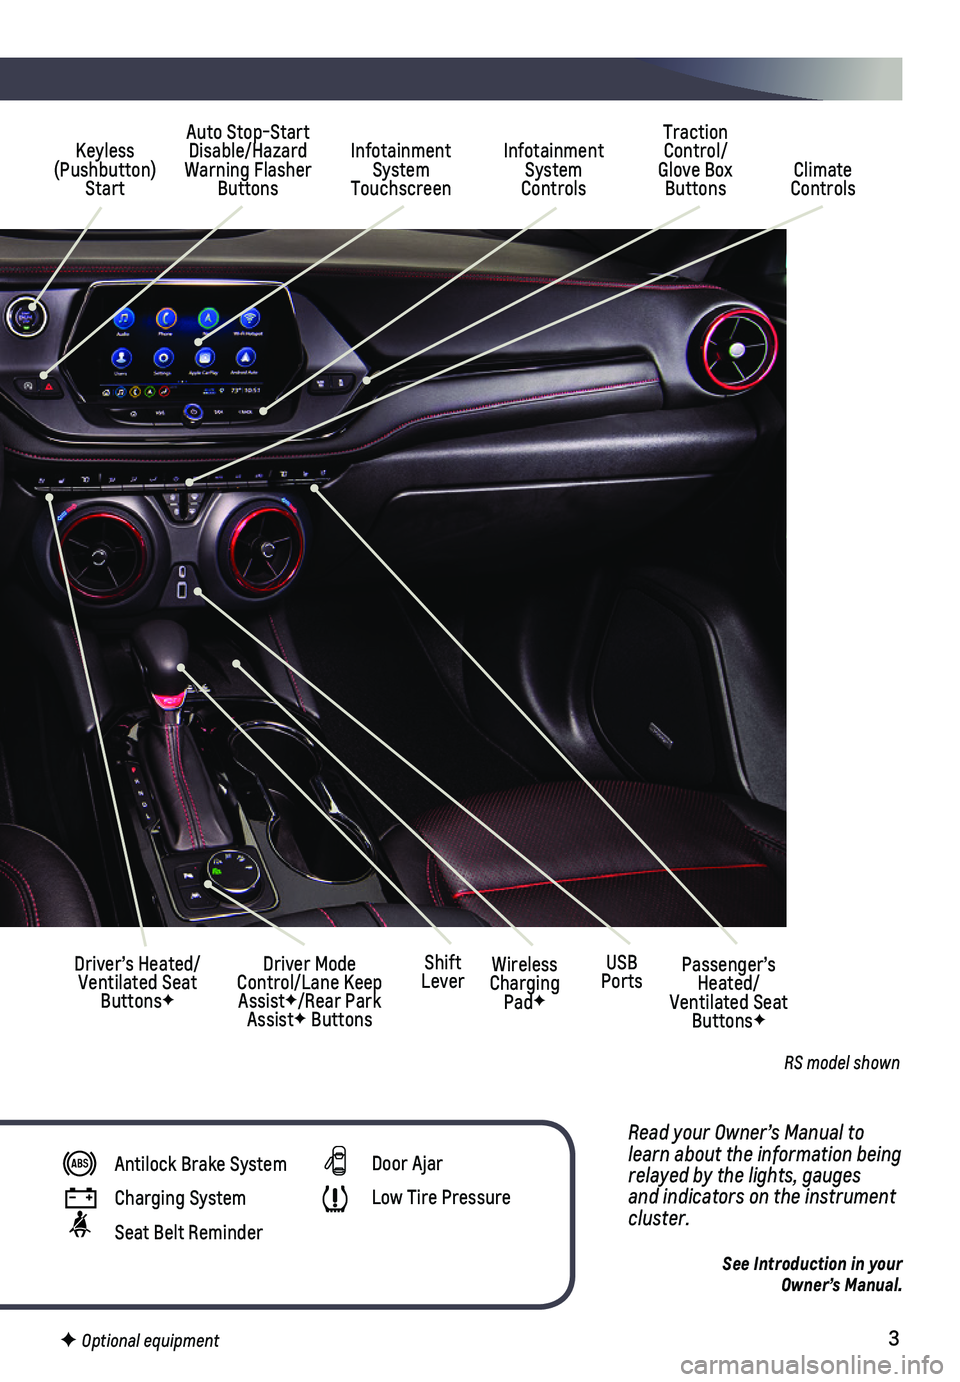 CHEVROLET BLAZER 2021  Get To Know Guide 3
Read your Owner’s Manual to learn about the information being relayed by the lights, gauges and indicators on the instrument cluster.
See Introduction in your  Owner’s Manual.
Infotainment Syste